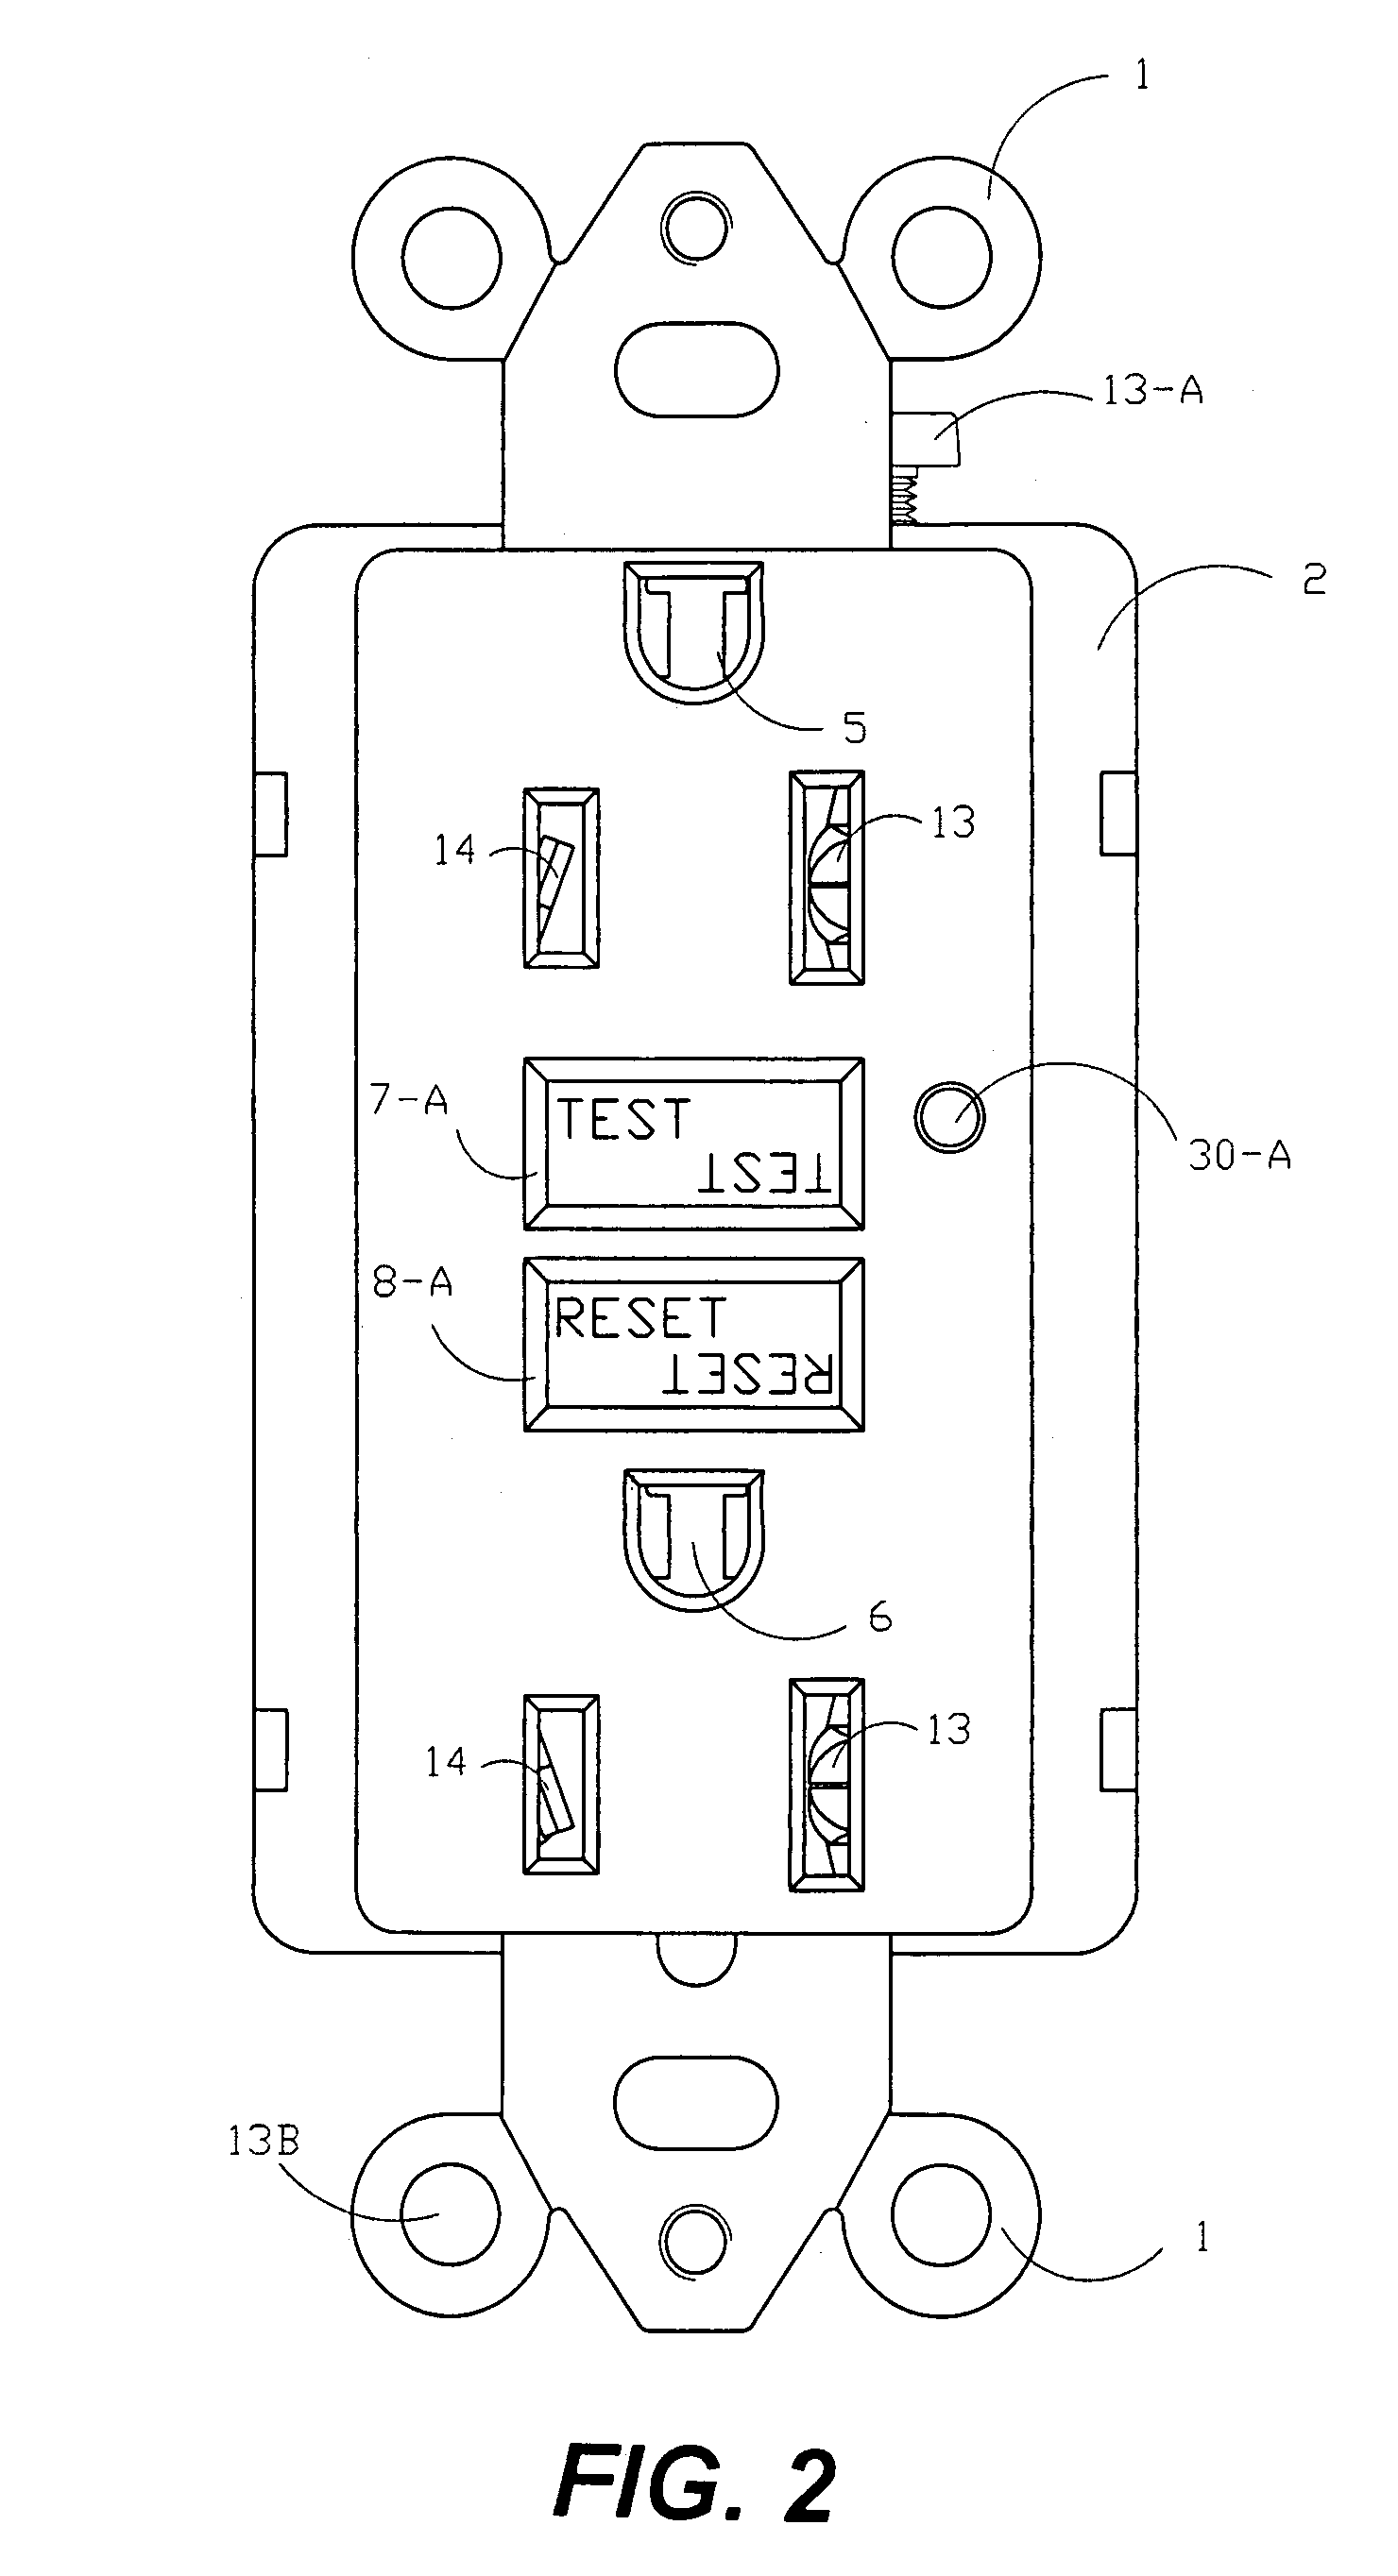 Circuit interrupting device with automatic end-of-life test